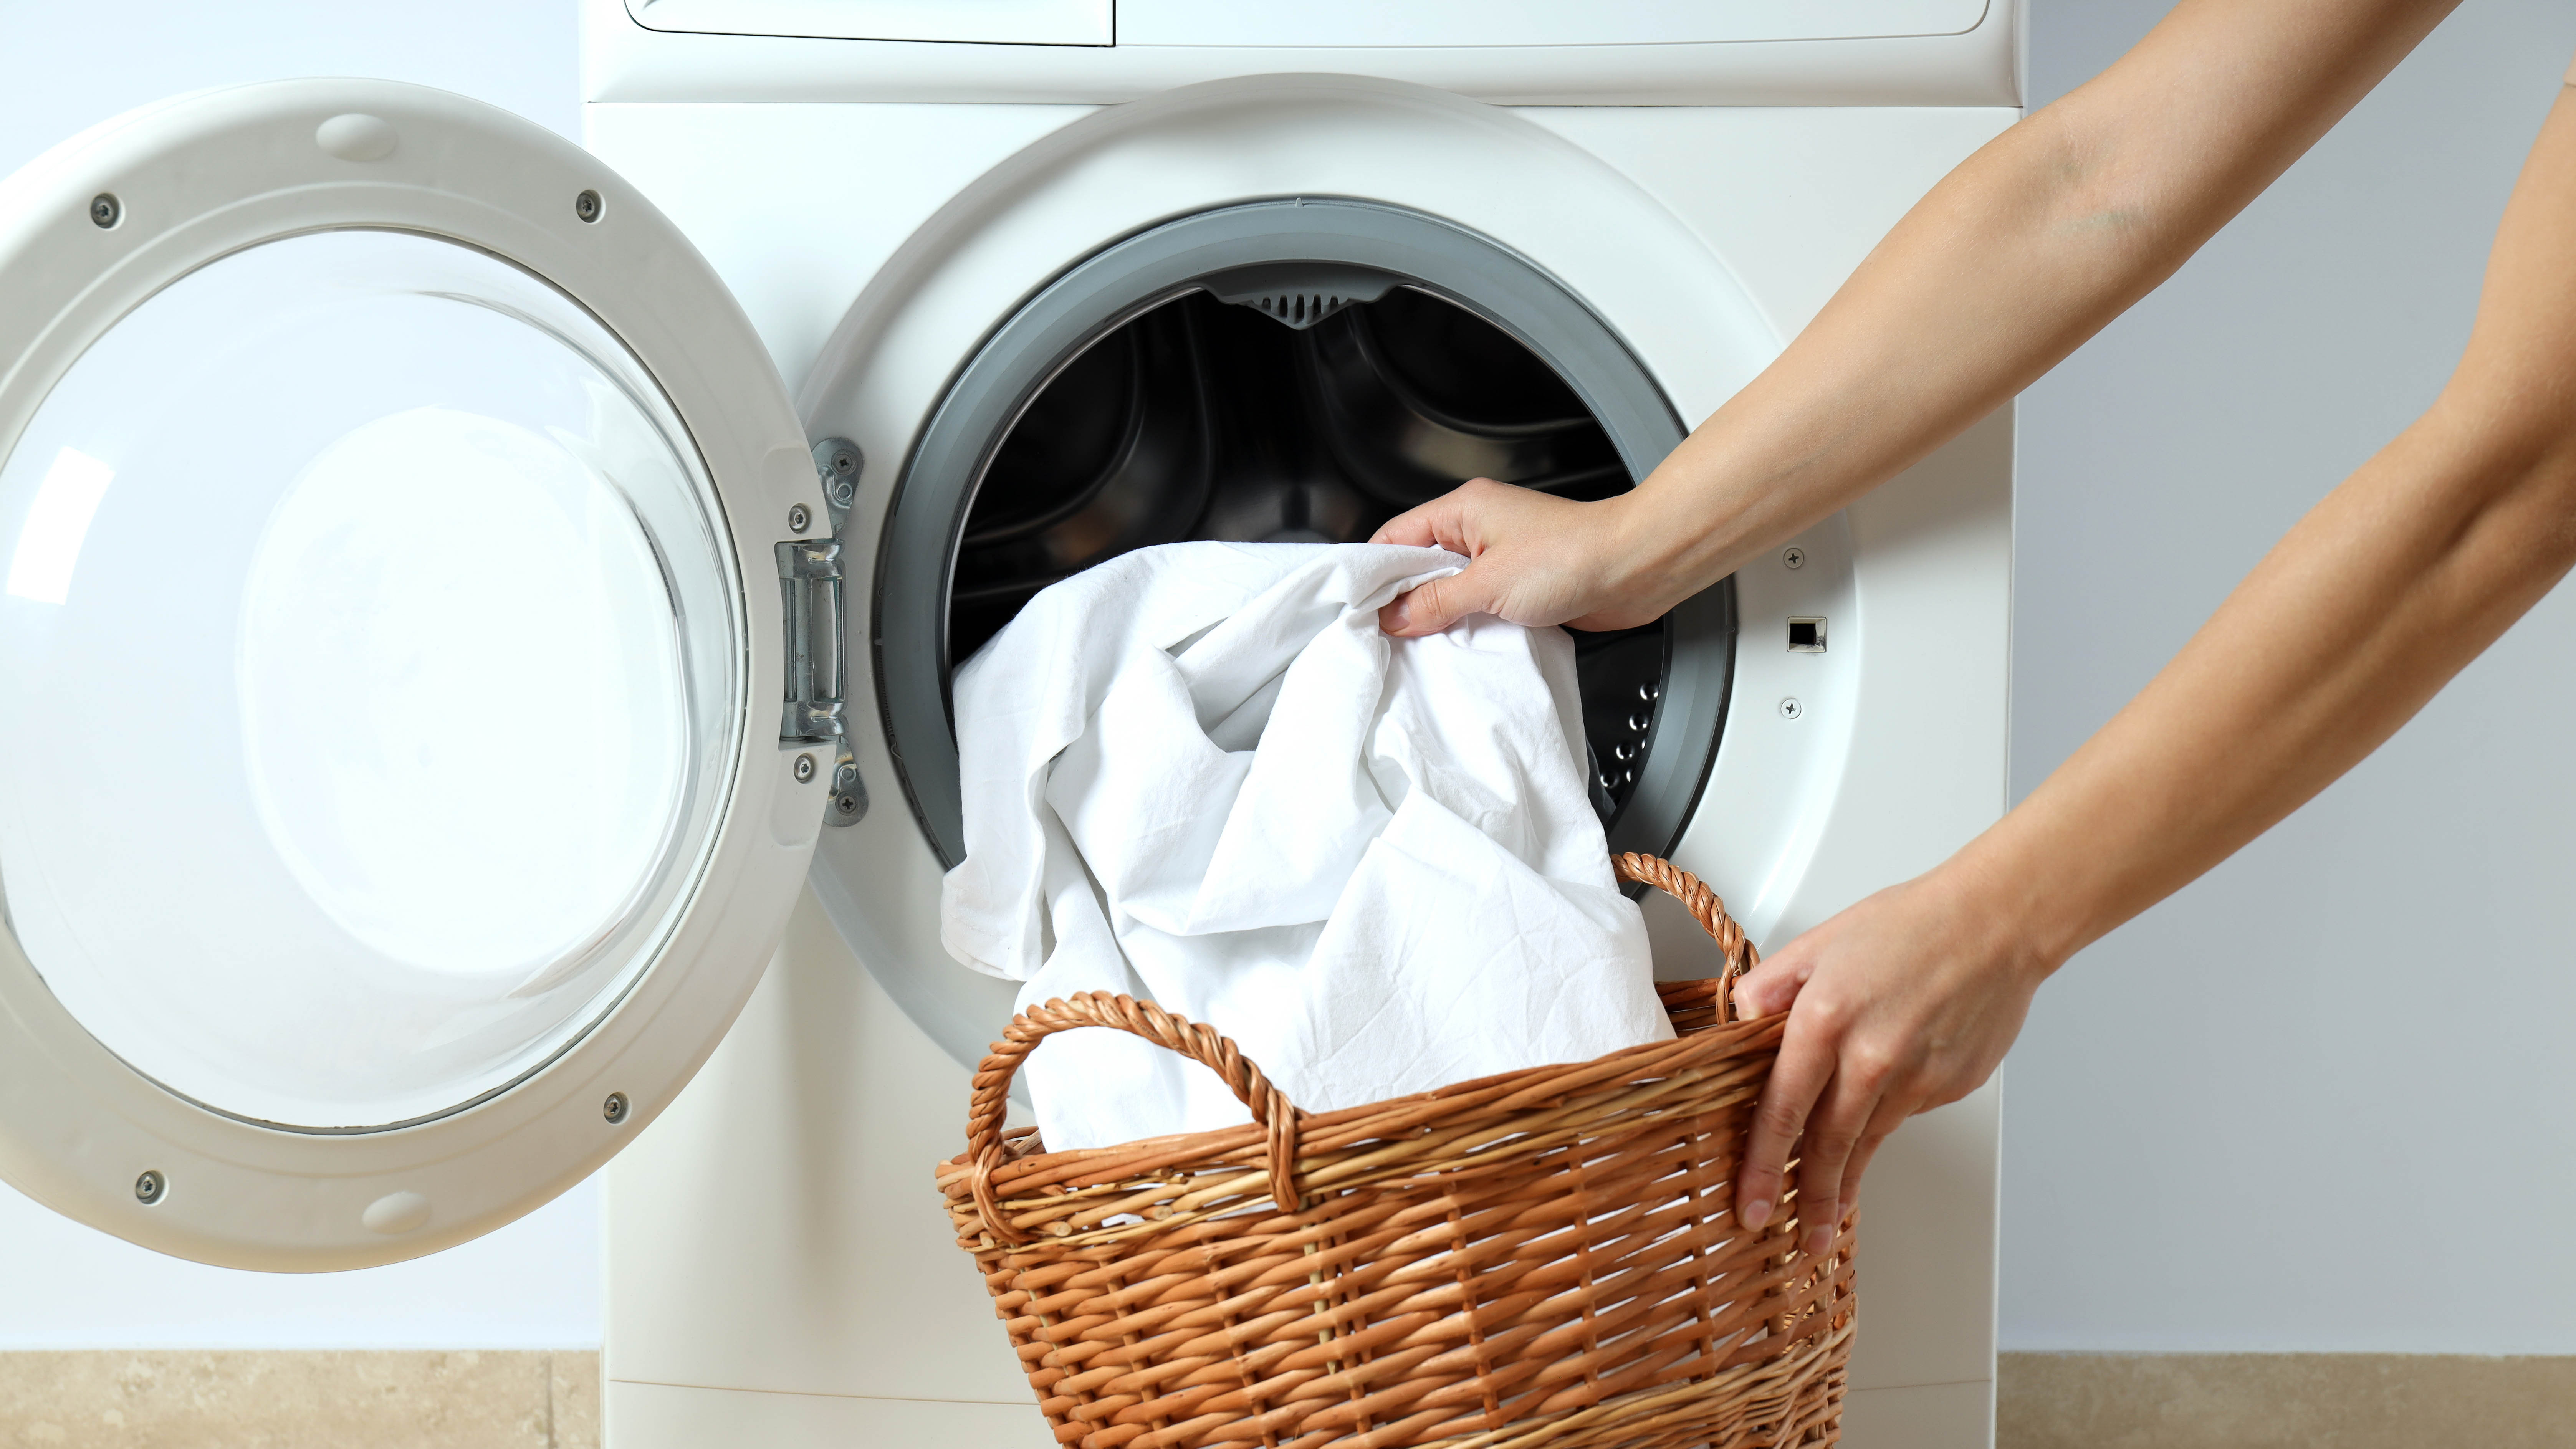 7 ways to prevent your clothes from tangling in the clothes dryer